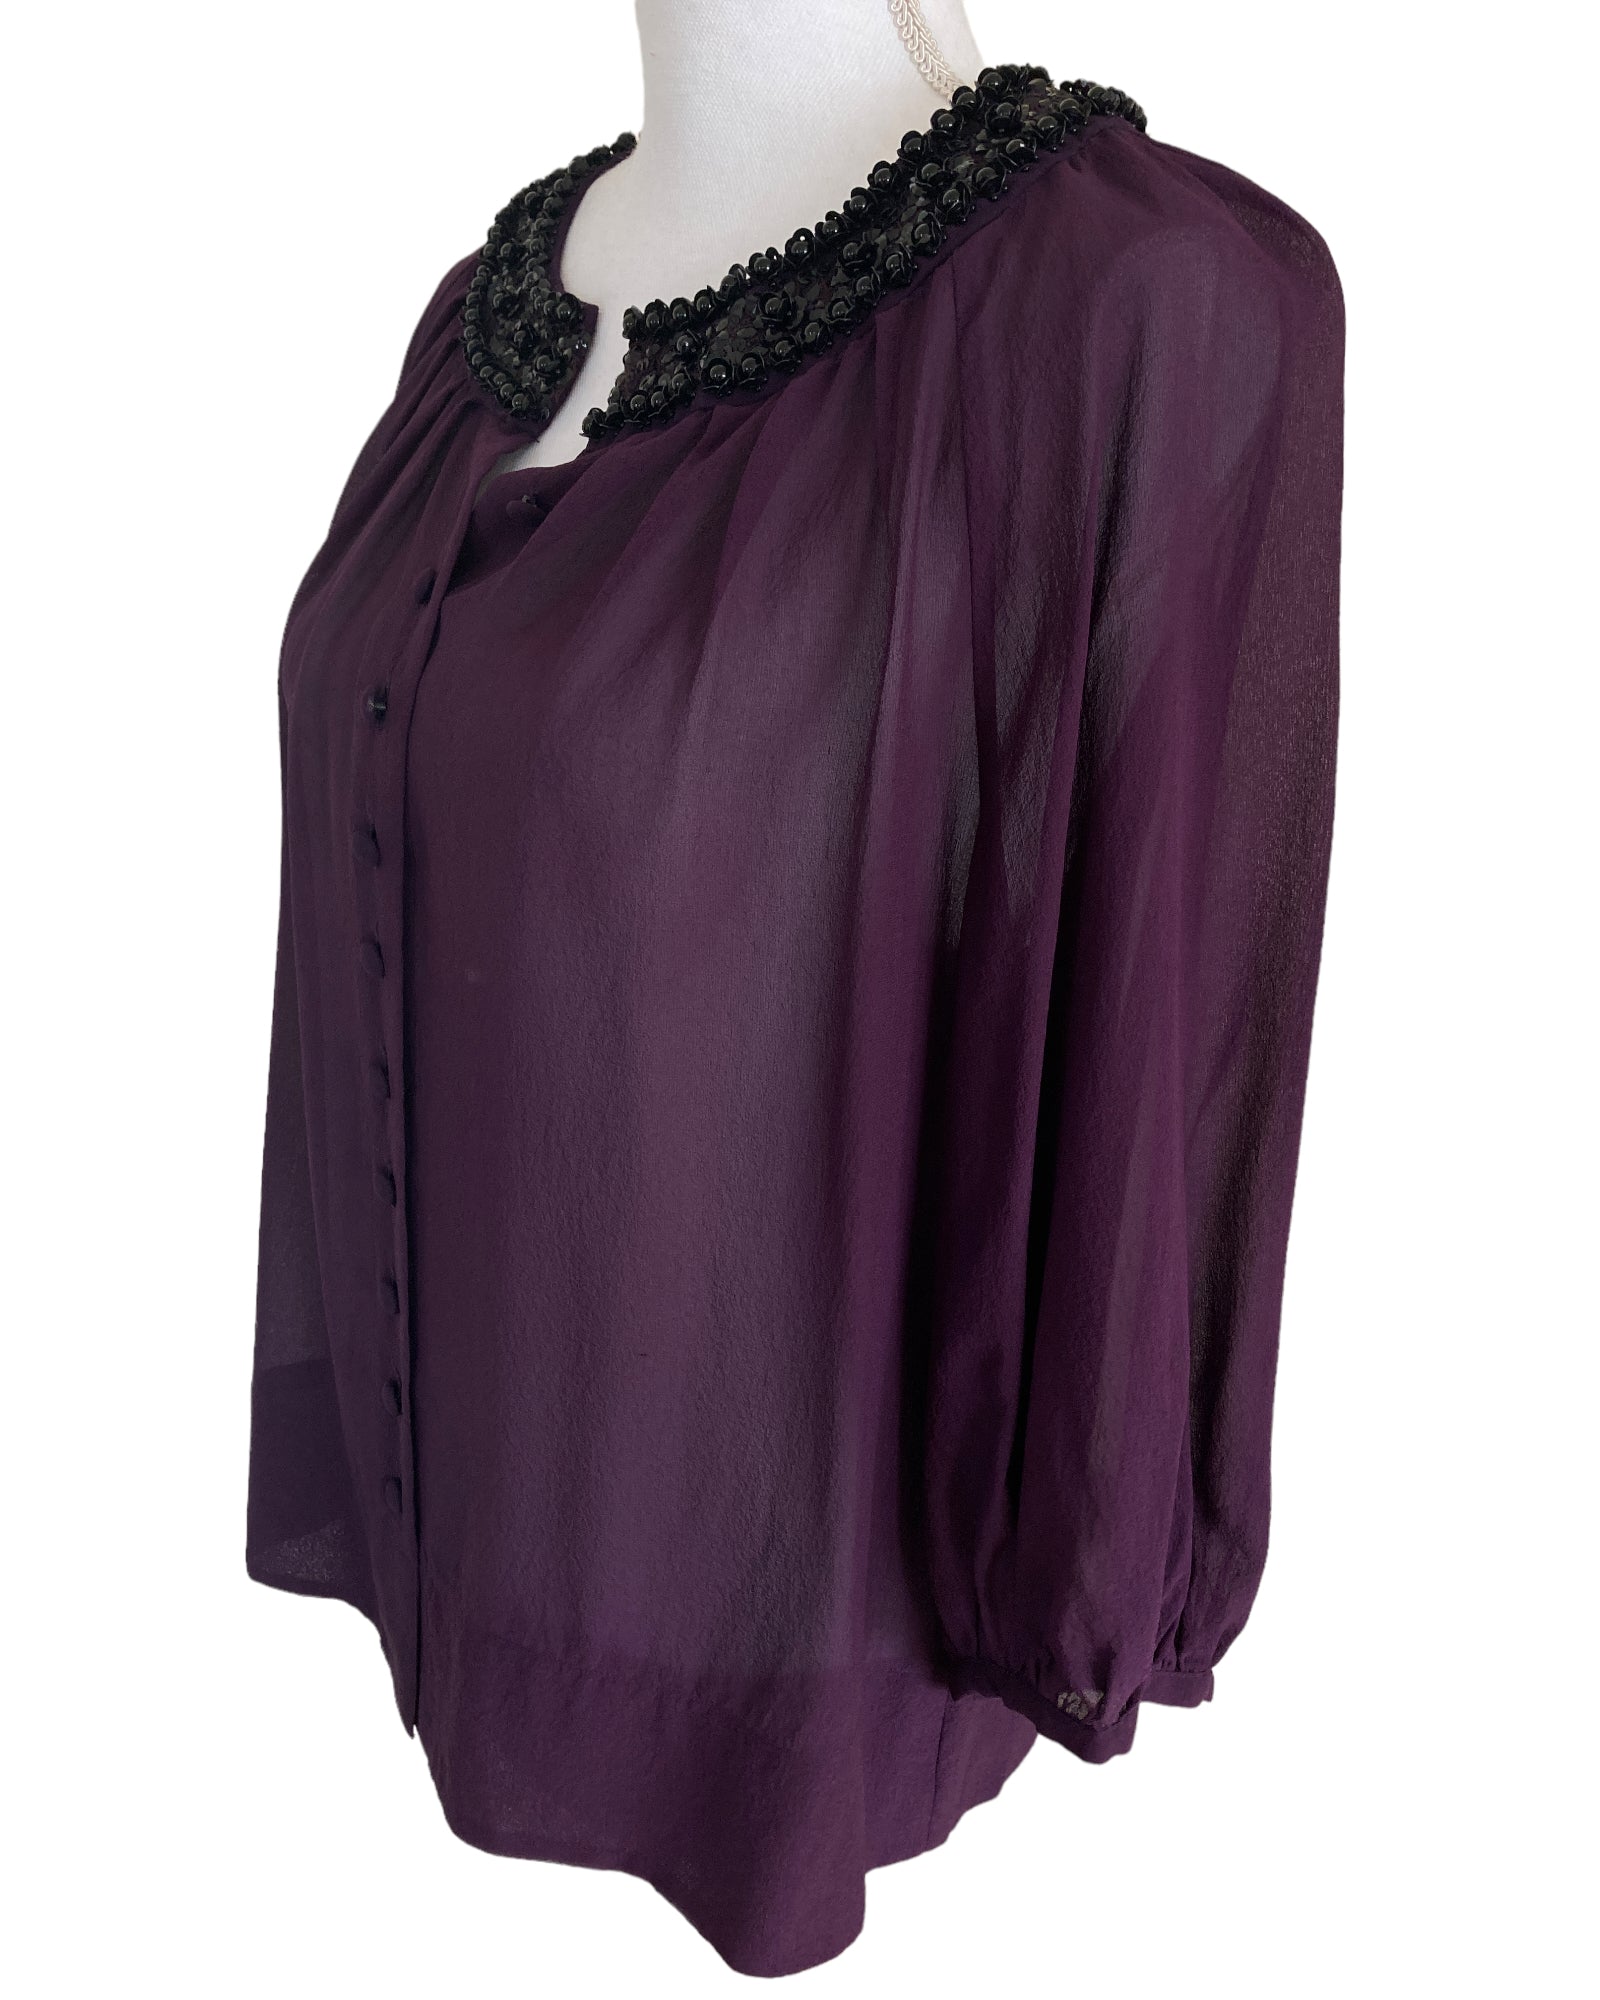 Ann Louise Roswald Purple Top with Beading, 12